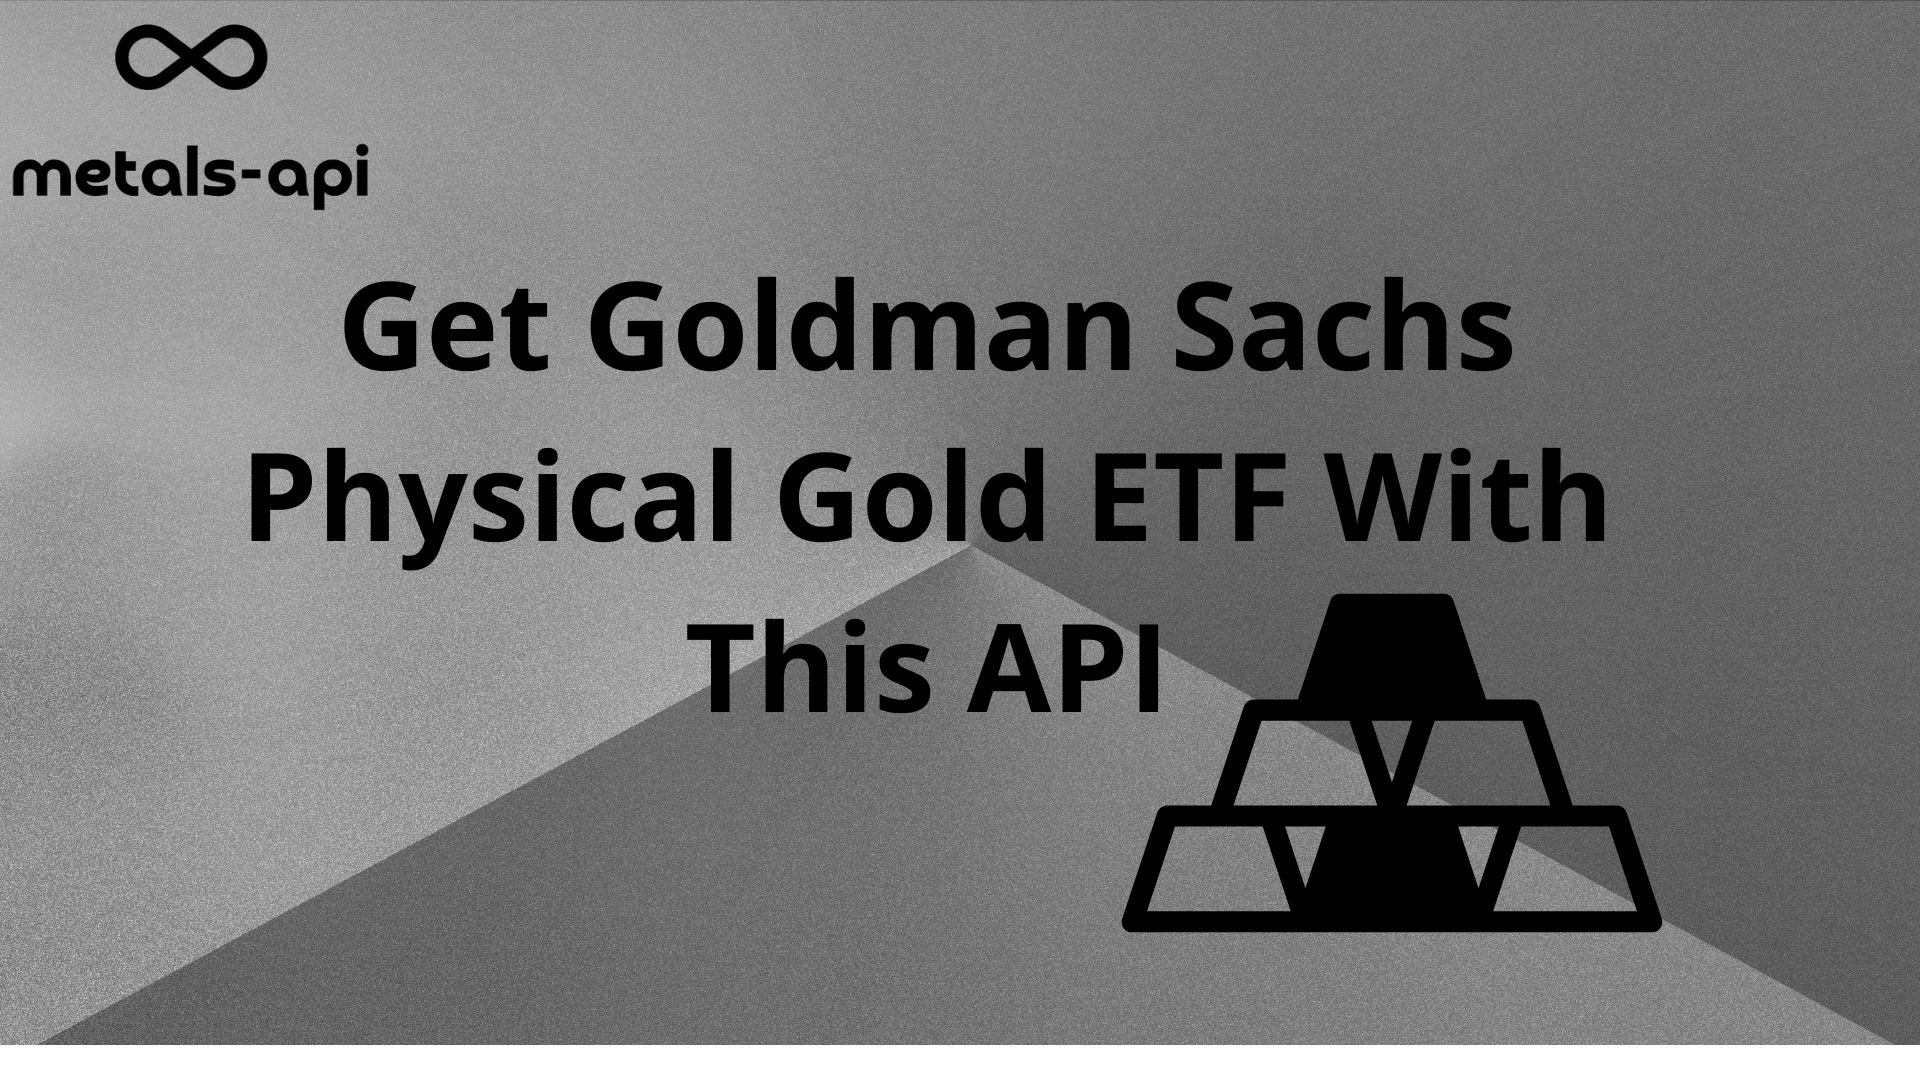 Get Goldman Sachs Physical Gold ETF With This API